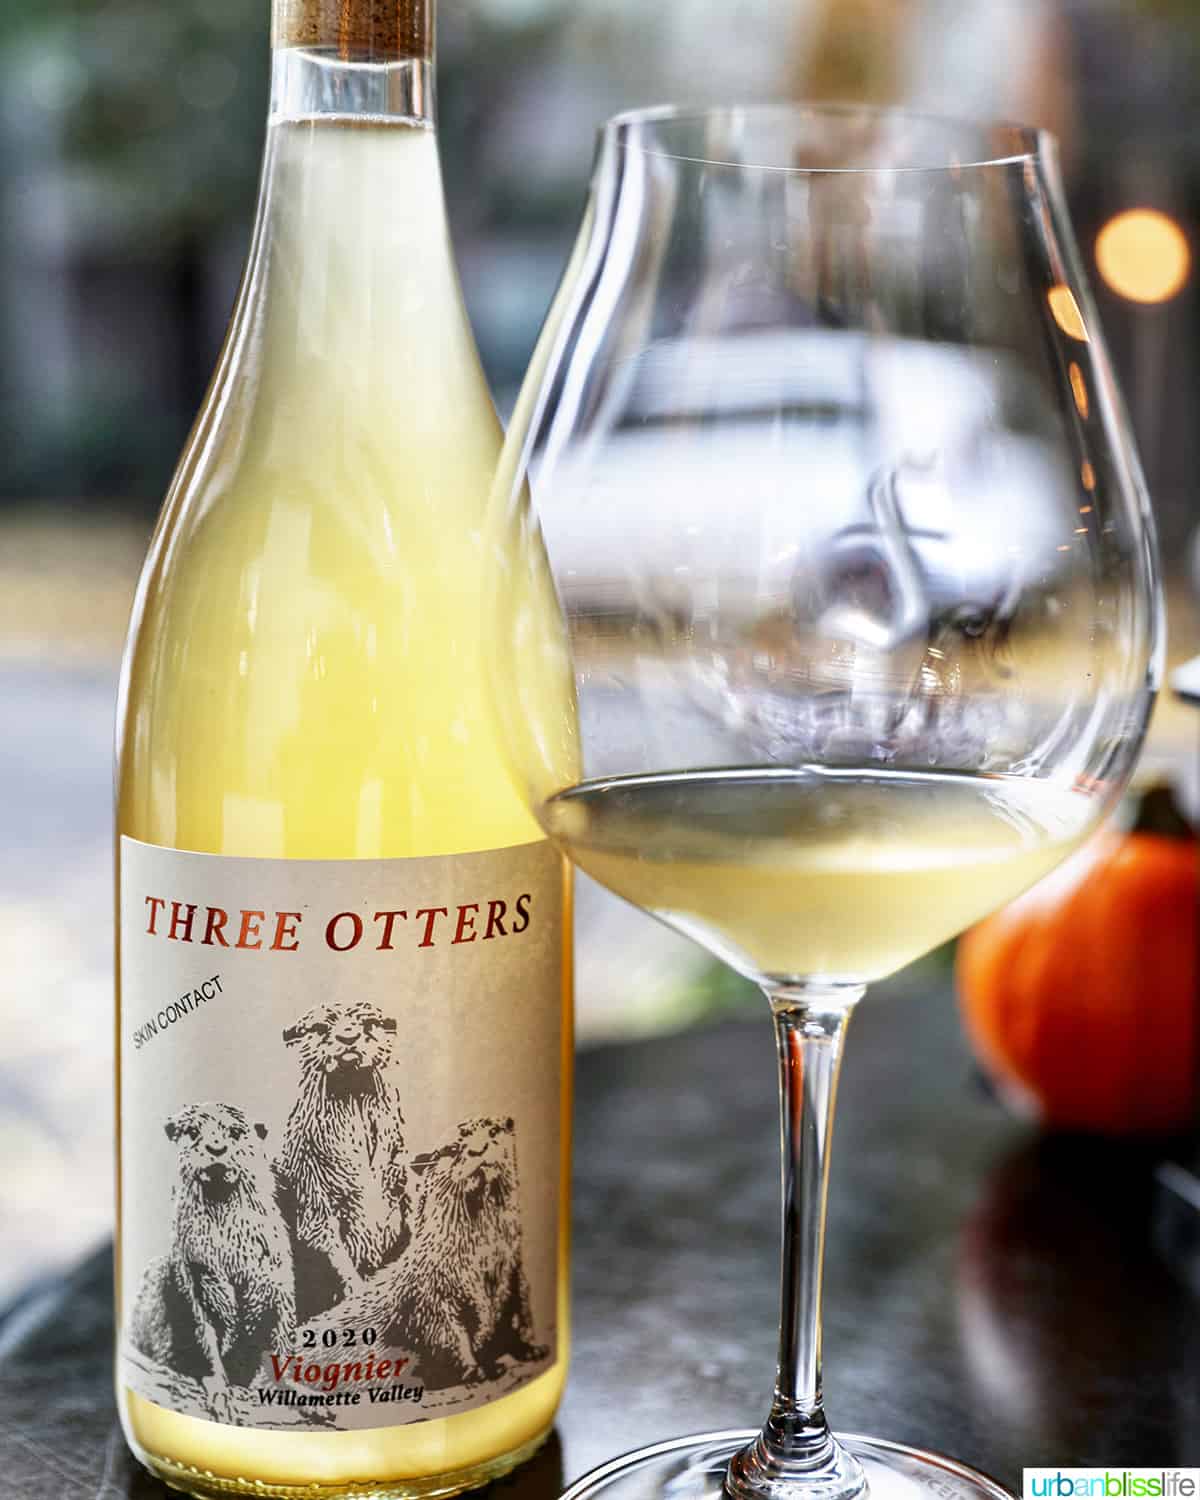 Fullerton Wines Three Otters Viognier wine bottle and glass of wine